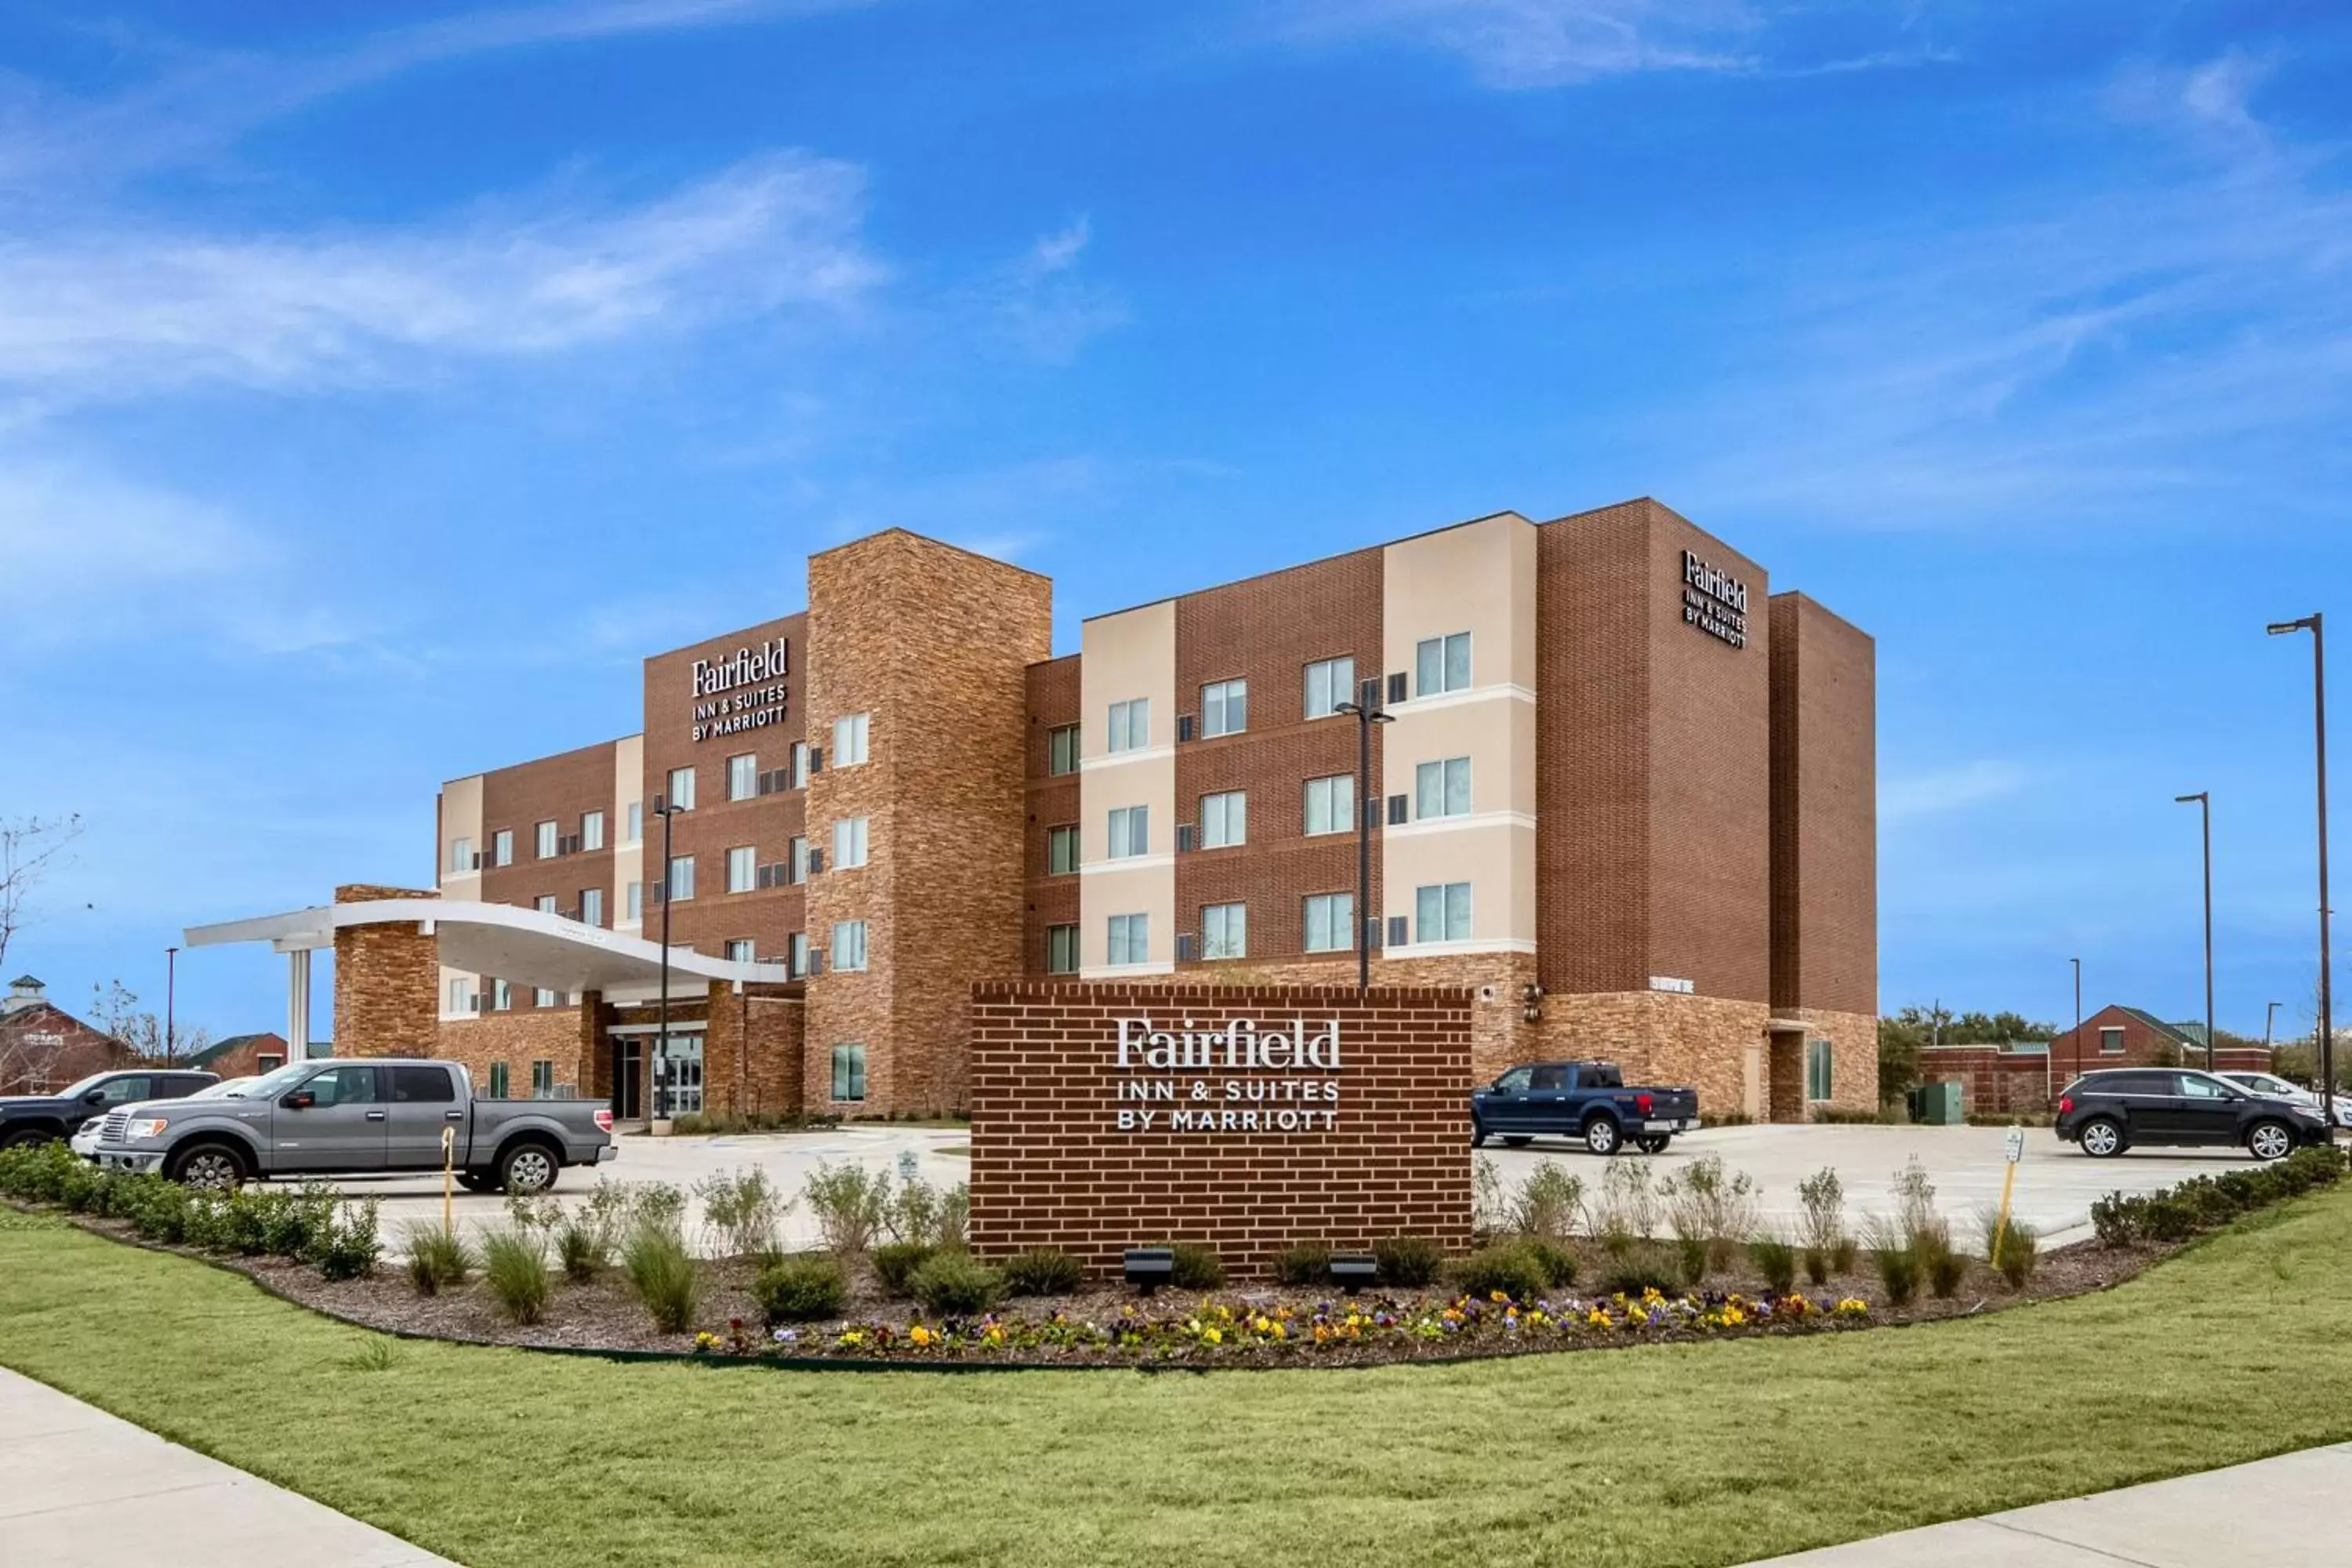 Property Building in Fairfield Inn & Suites by Marriott Dallas DFW Airport North Coppell Grapevine